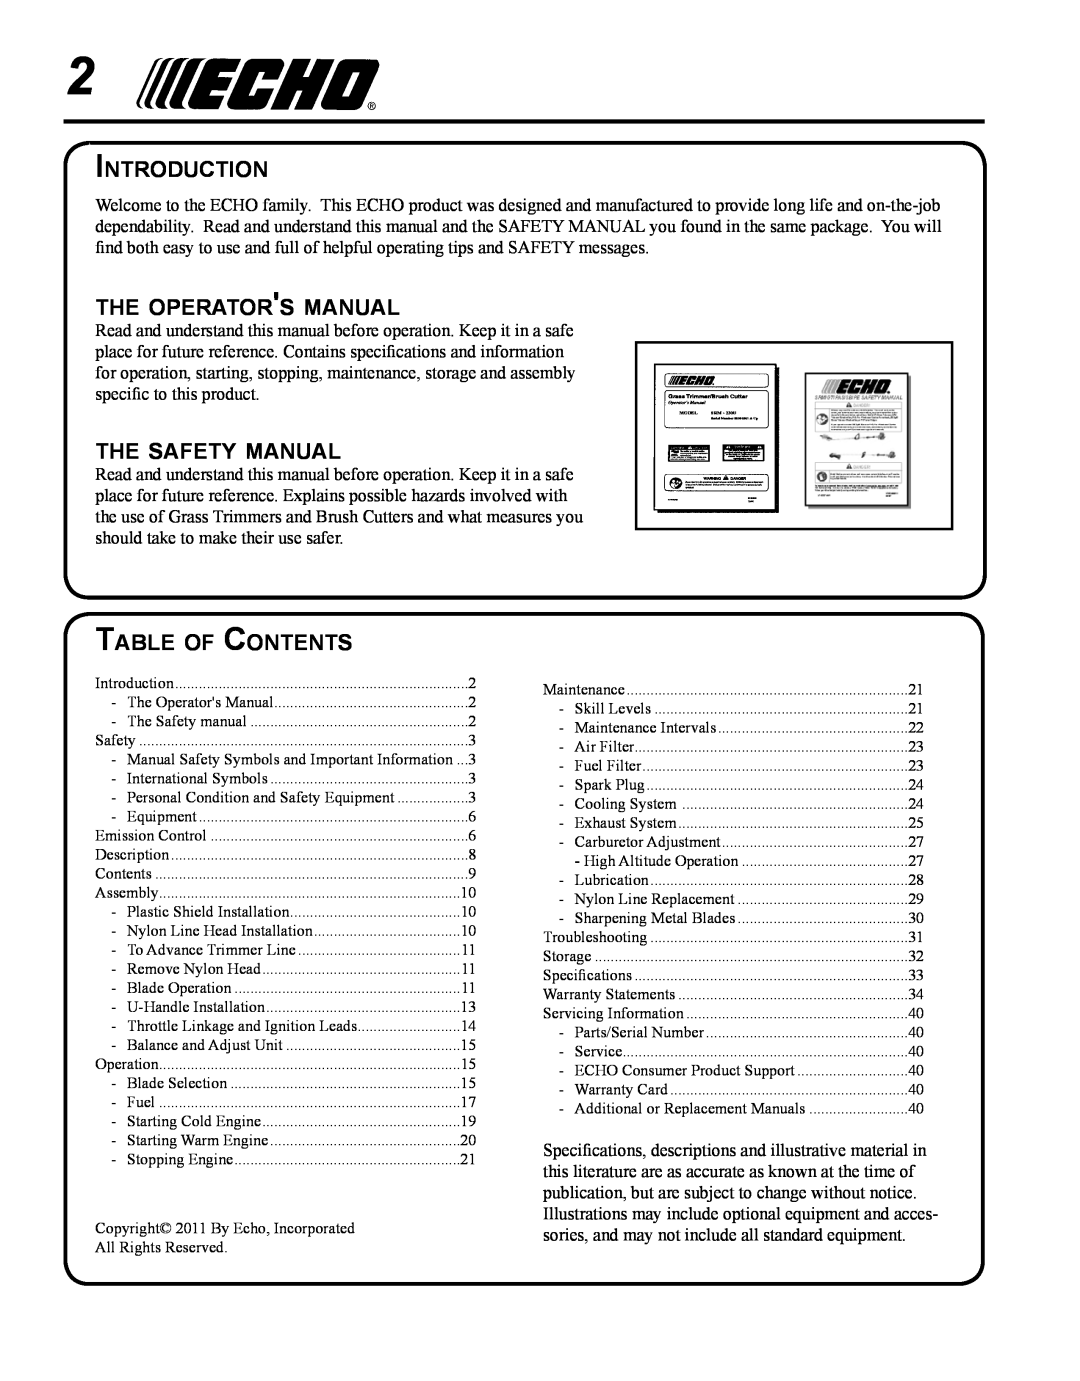 Echo SRM - 280U Introduction, the operators manual, the safety manual, Table of Contents 